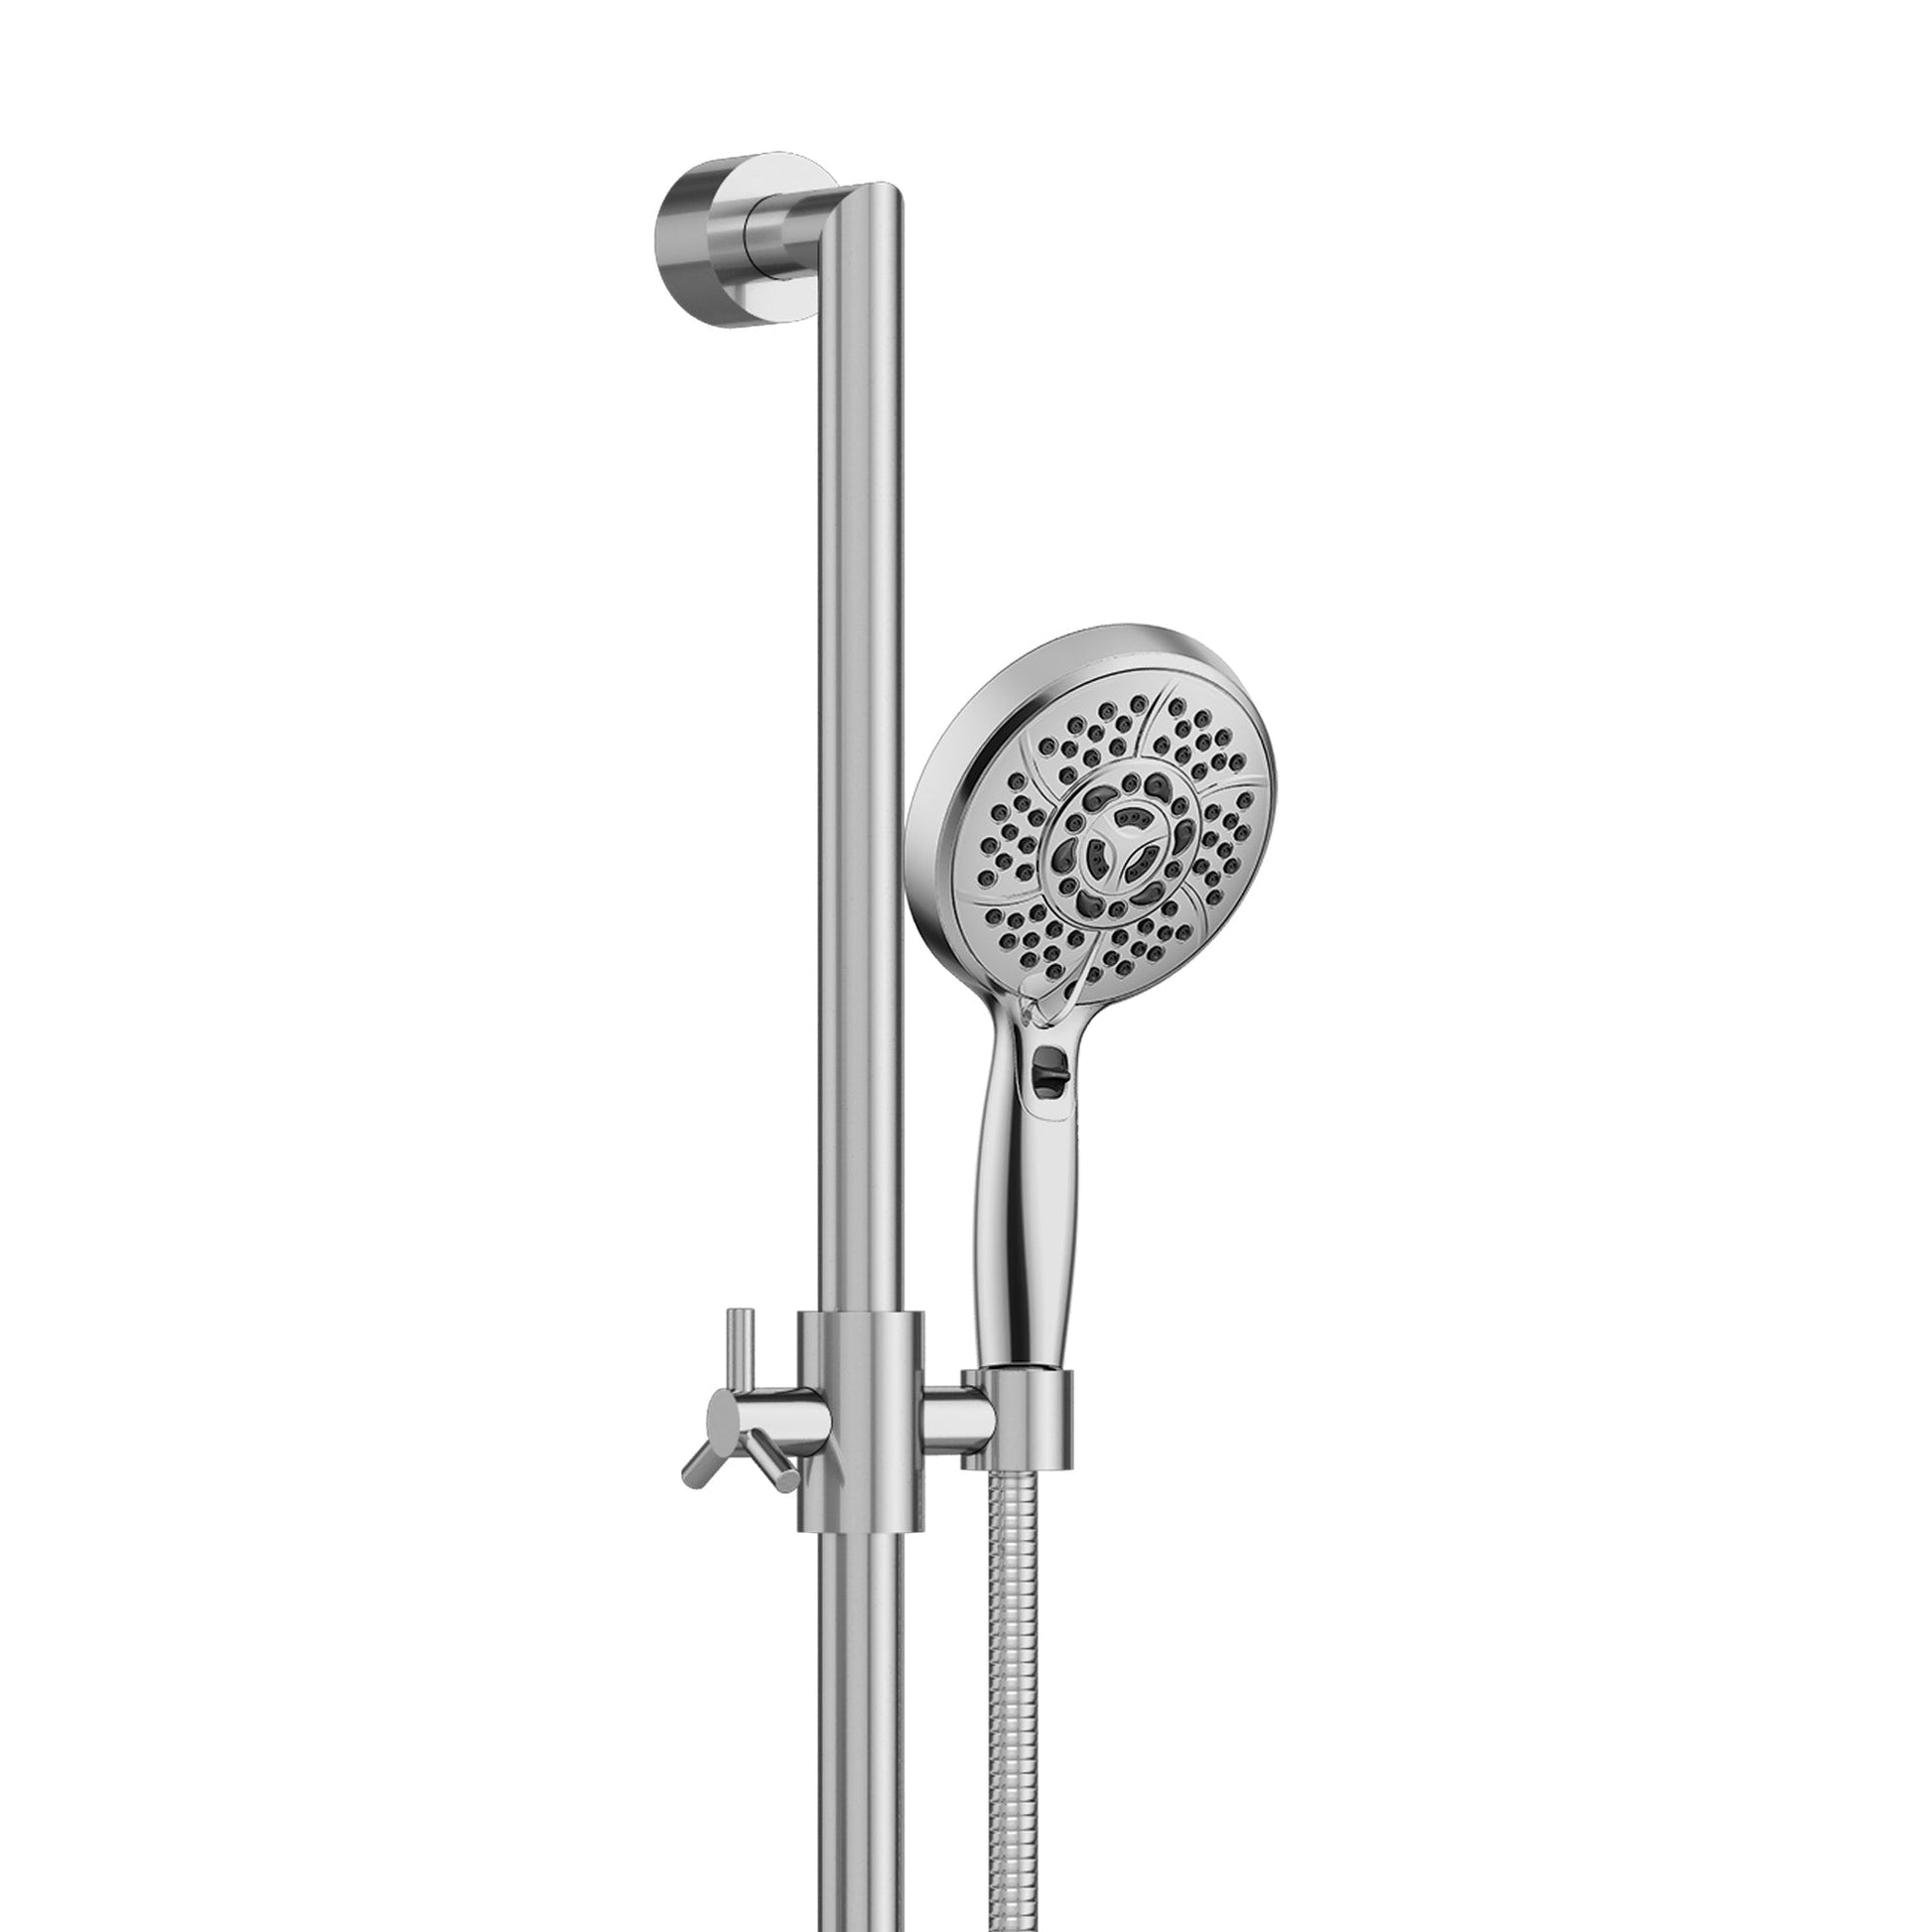 PULSE ShowerSpas AquaBar 2.5 GPM Shower System in Brushed Nickel Finish With Multi Function Handheld Shower